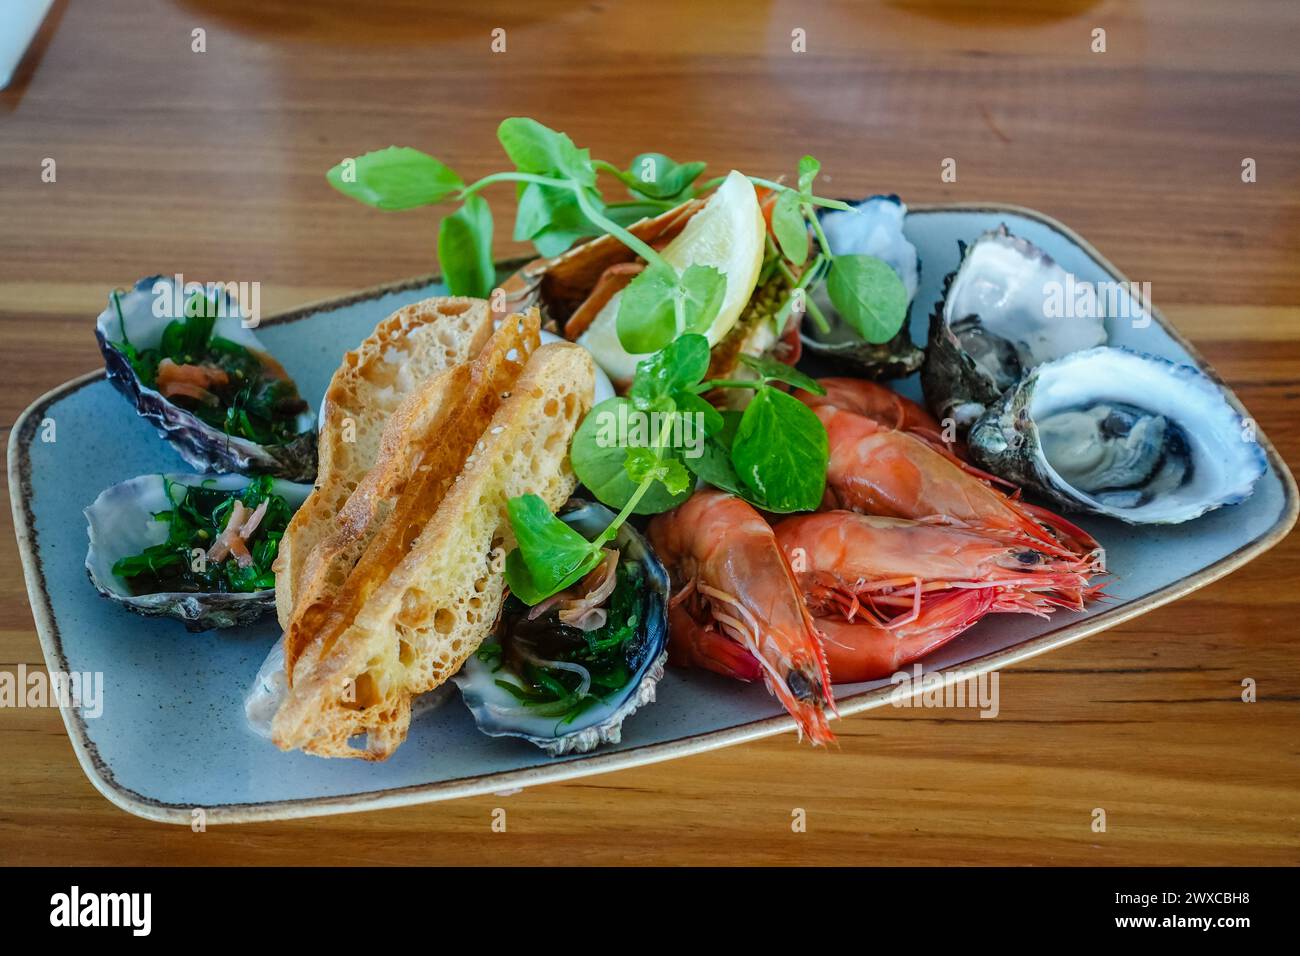 seafood appetizer consisting of oyster and shrimp typically served in a restaurant in australia Stock Photo